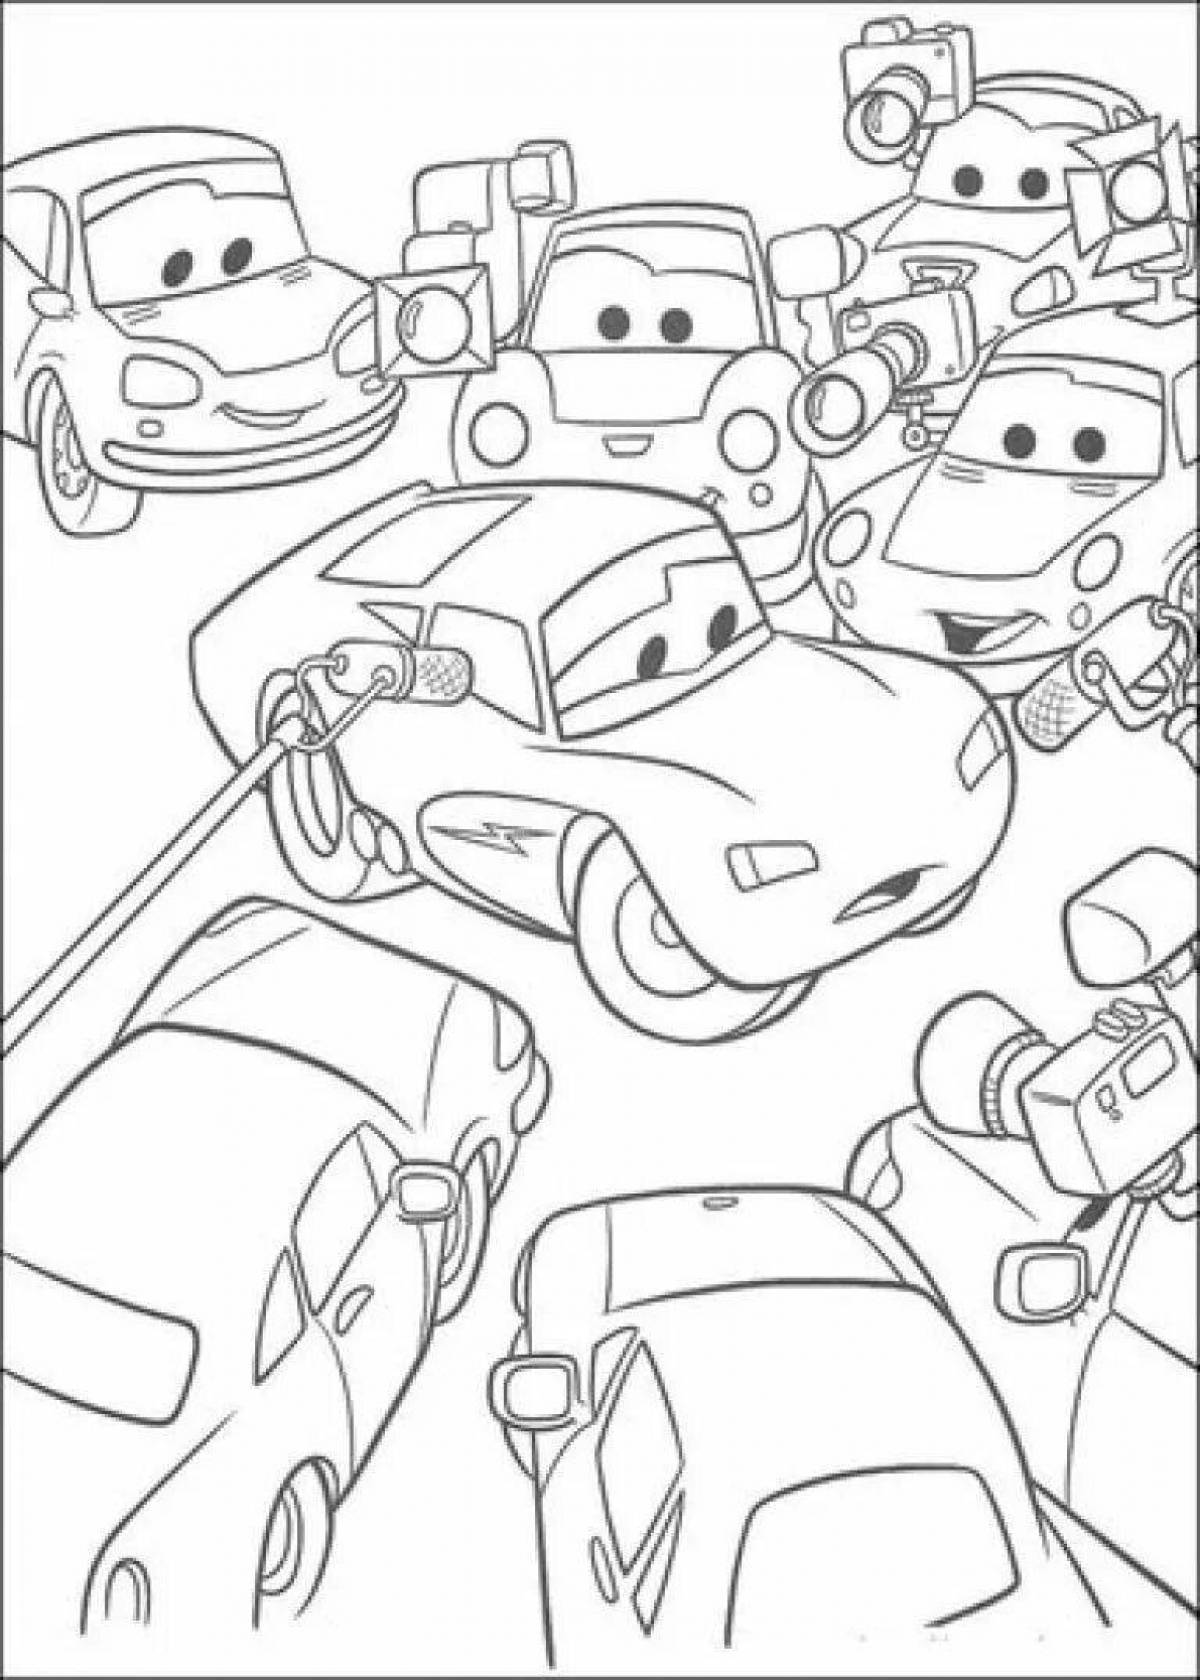 Exciting car coloring